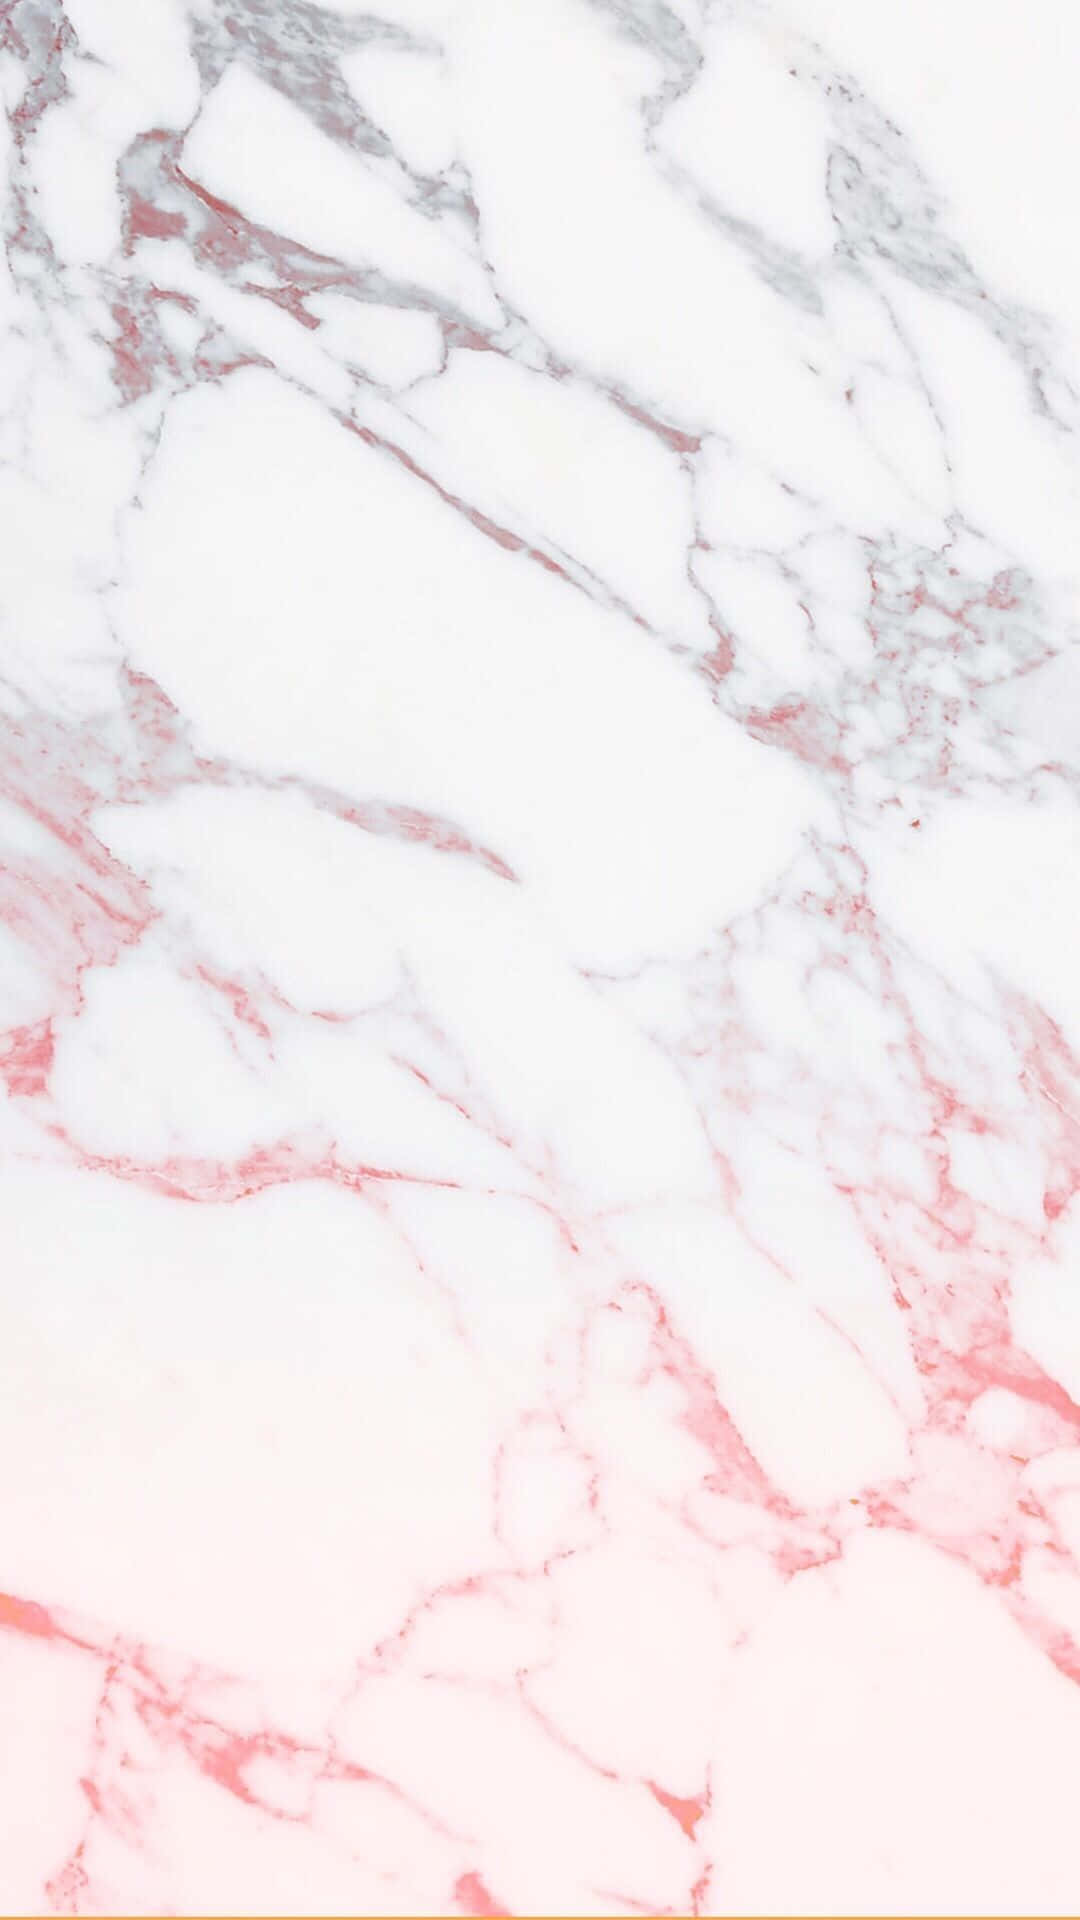 Get a unique look with smart features with the Marble Phone Wallpaper